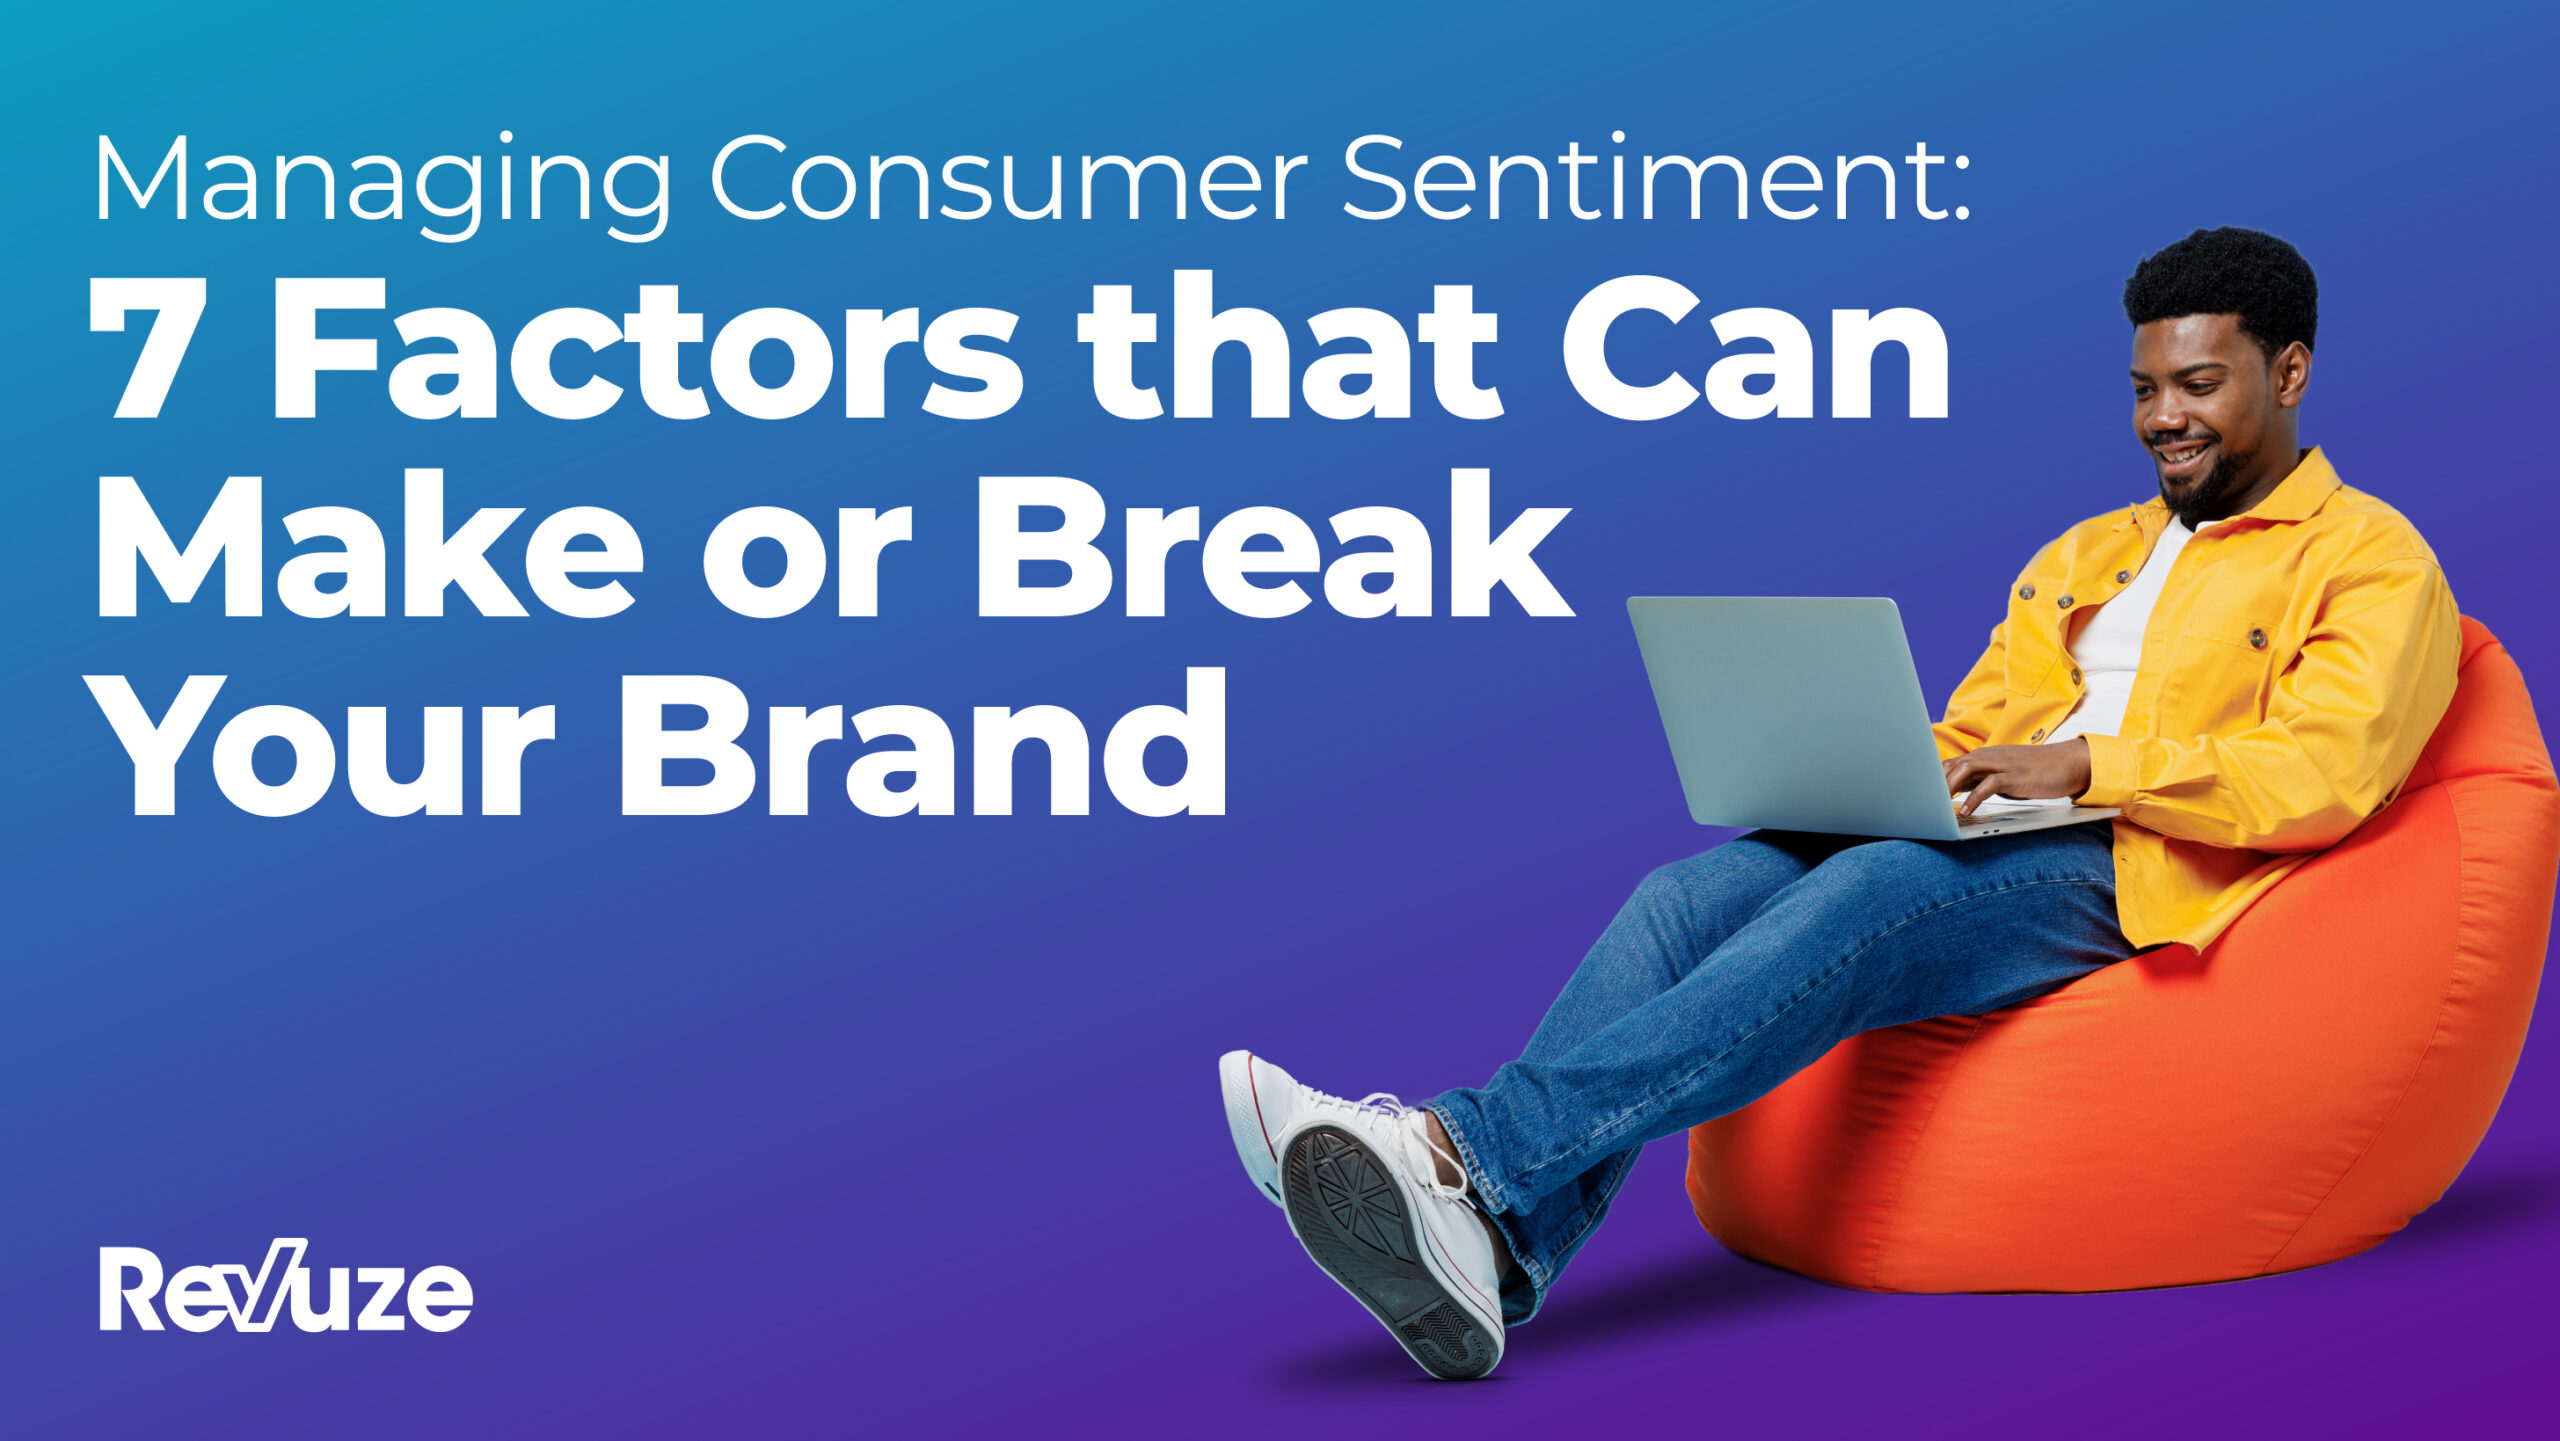 Managing Consumer Sentiment: 7 Factors that Can Make or Break Your Brand